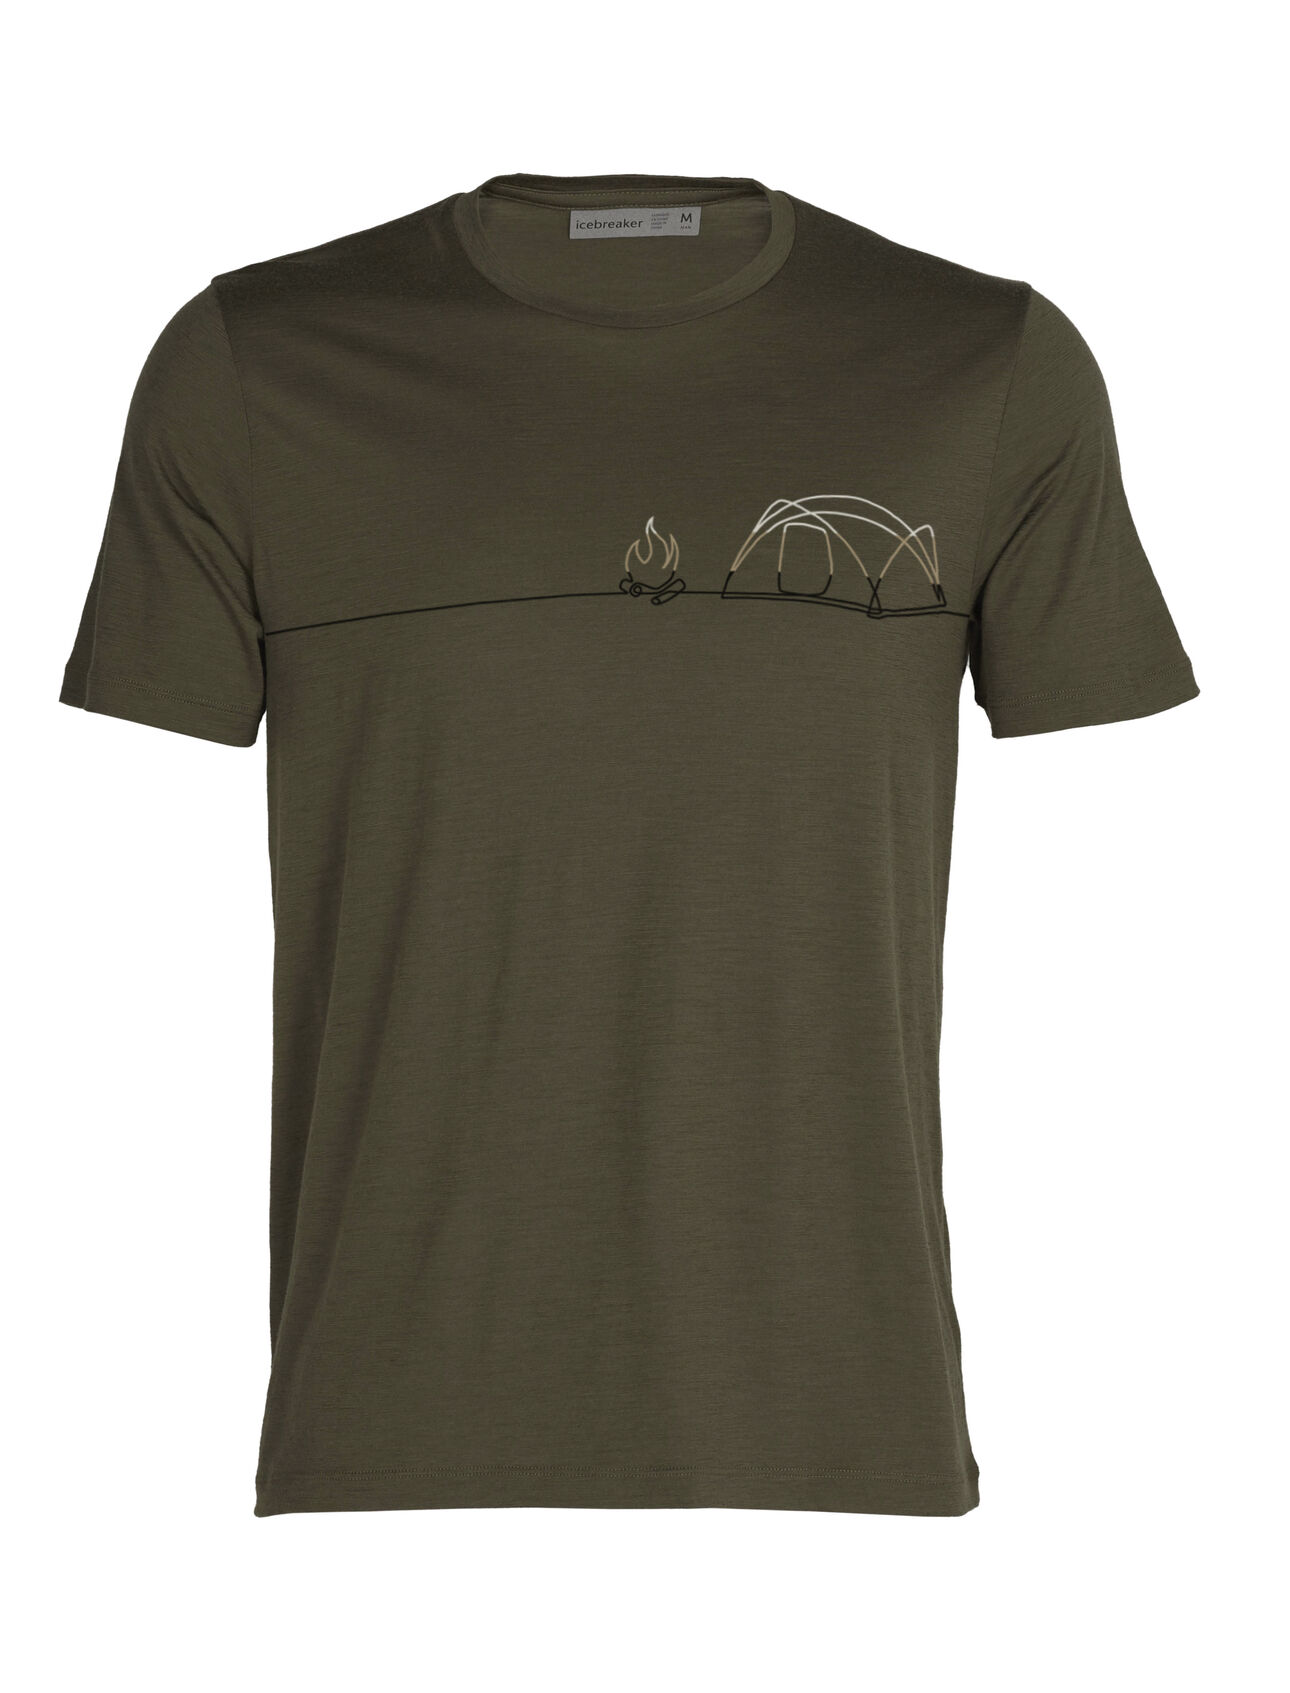 Mens Merino Tech Lite II Short Sleeve T-Shirt Single Line Camp  Our versatile tech tee that provides comfort, breathability and odor-resistance for any adventure you can think of, the Tech Lite II Short Sleeve Tee Single Line Camp features 100% merino for all-natural performance. The original artwork evokes the simple, peaceful feeling of sleeping outdoors. 